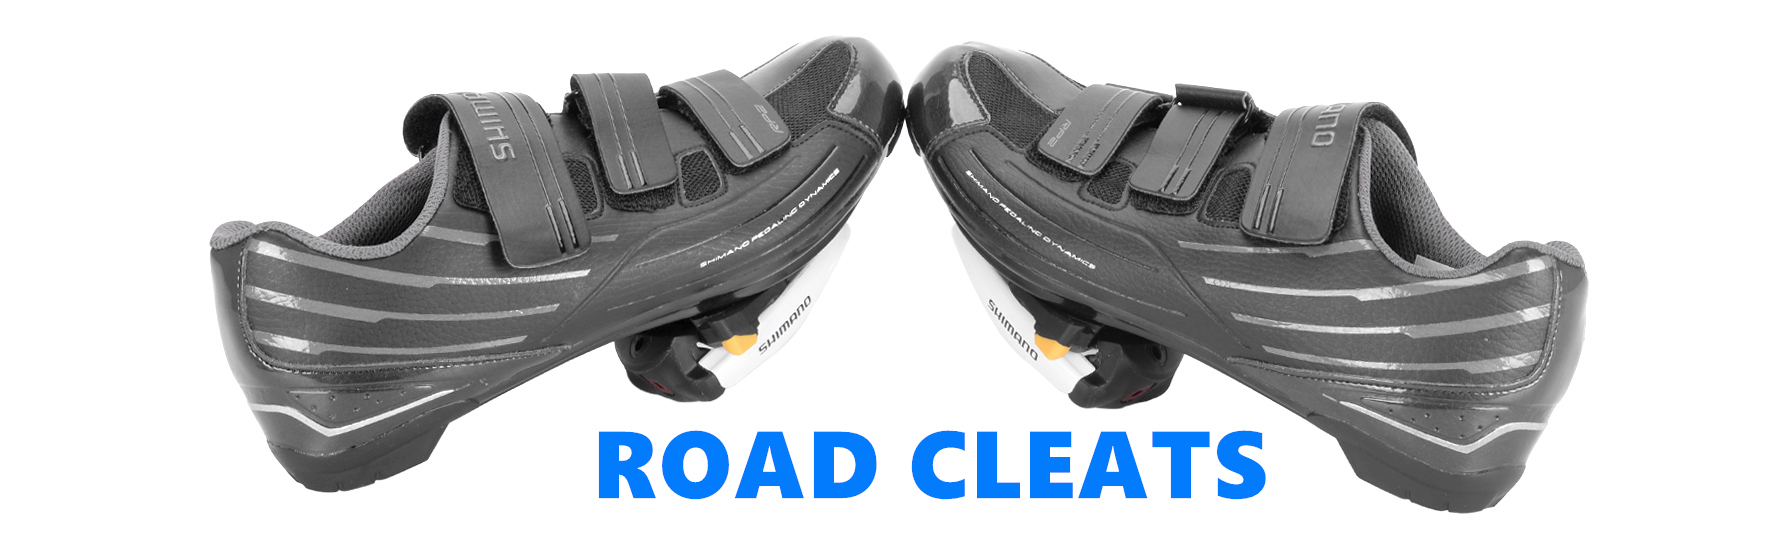 road cleat